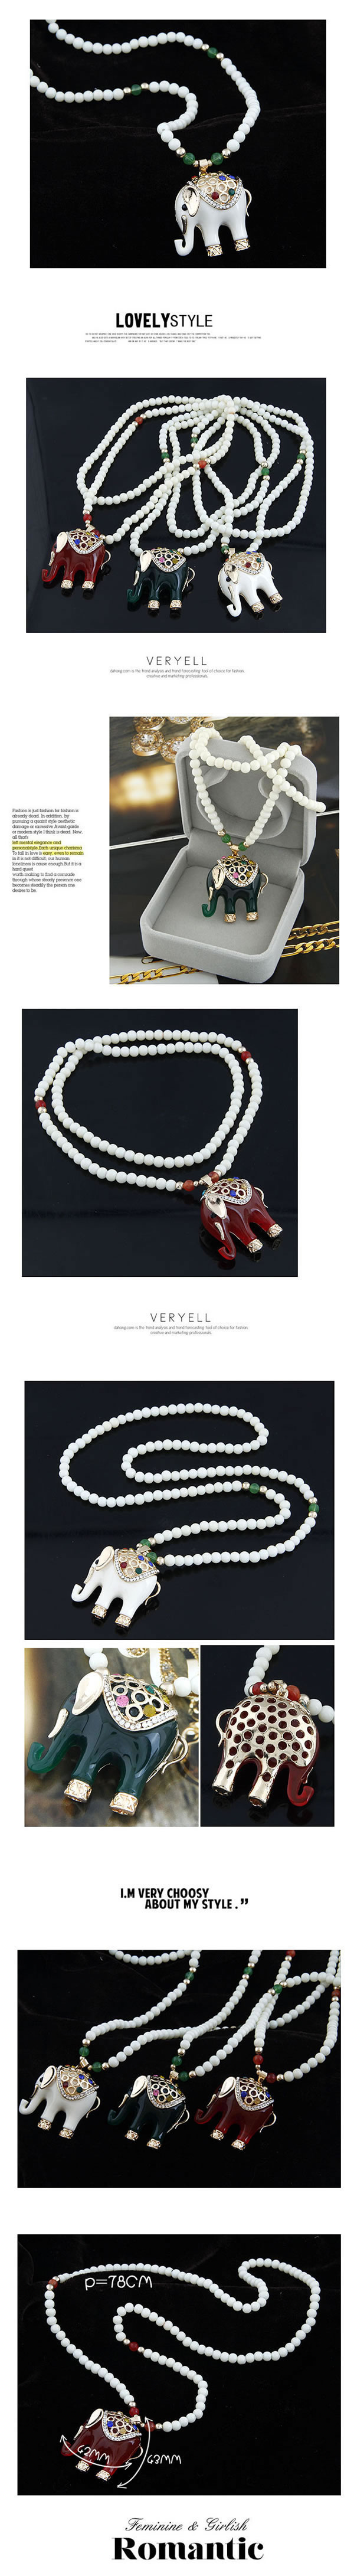 Huge White Cute Elephant Pendant Alloy Beaded Necklaces,Beaded Necklaces